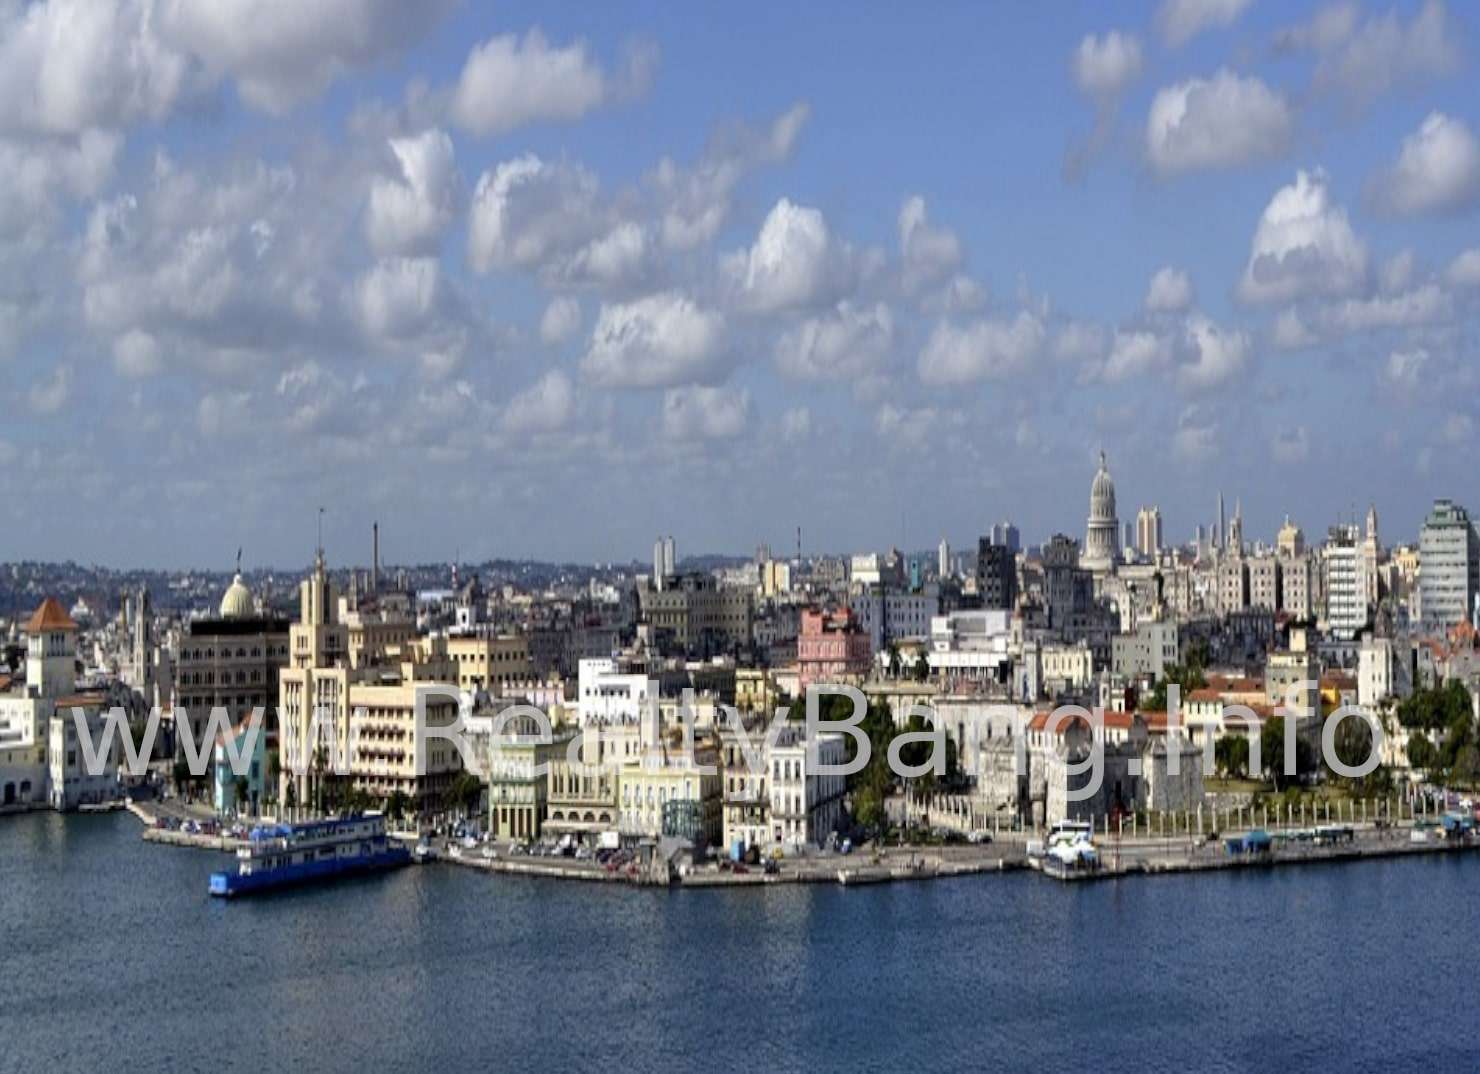 BUYING PROPERTY AND REAL ESTATE IN CUBA